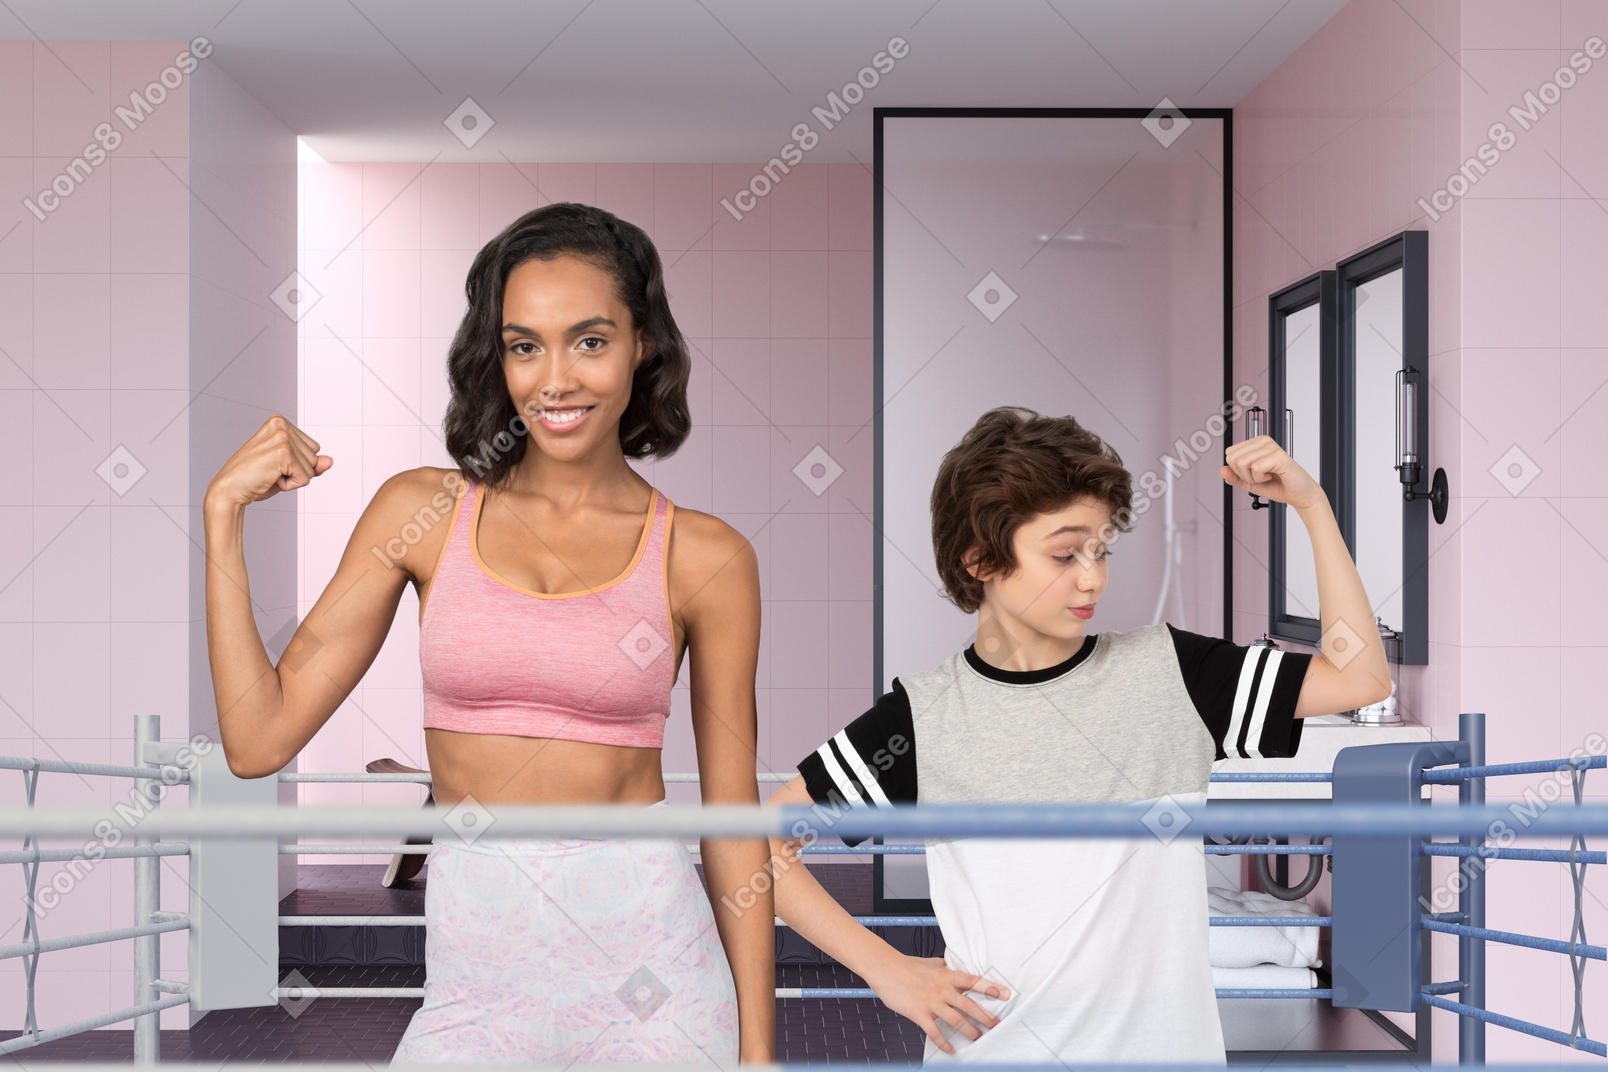 A woman lifting weights in the gym